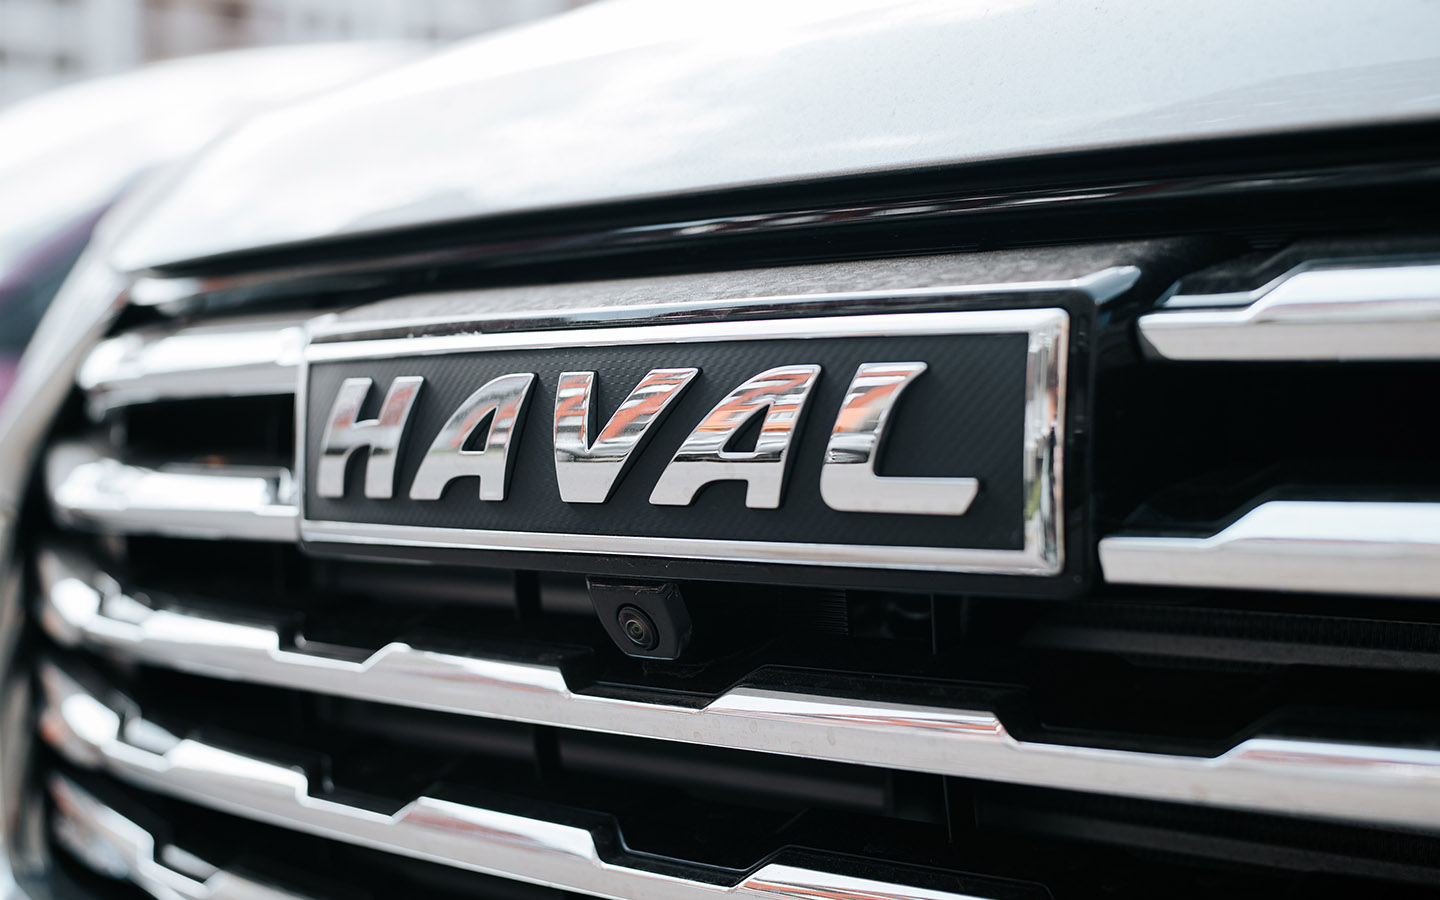 used and new Haval dealership in the UAE